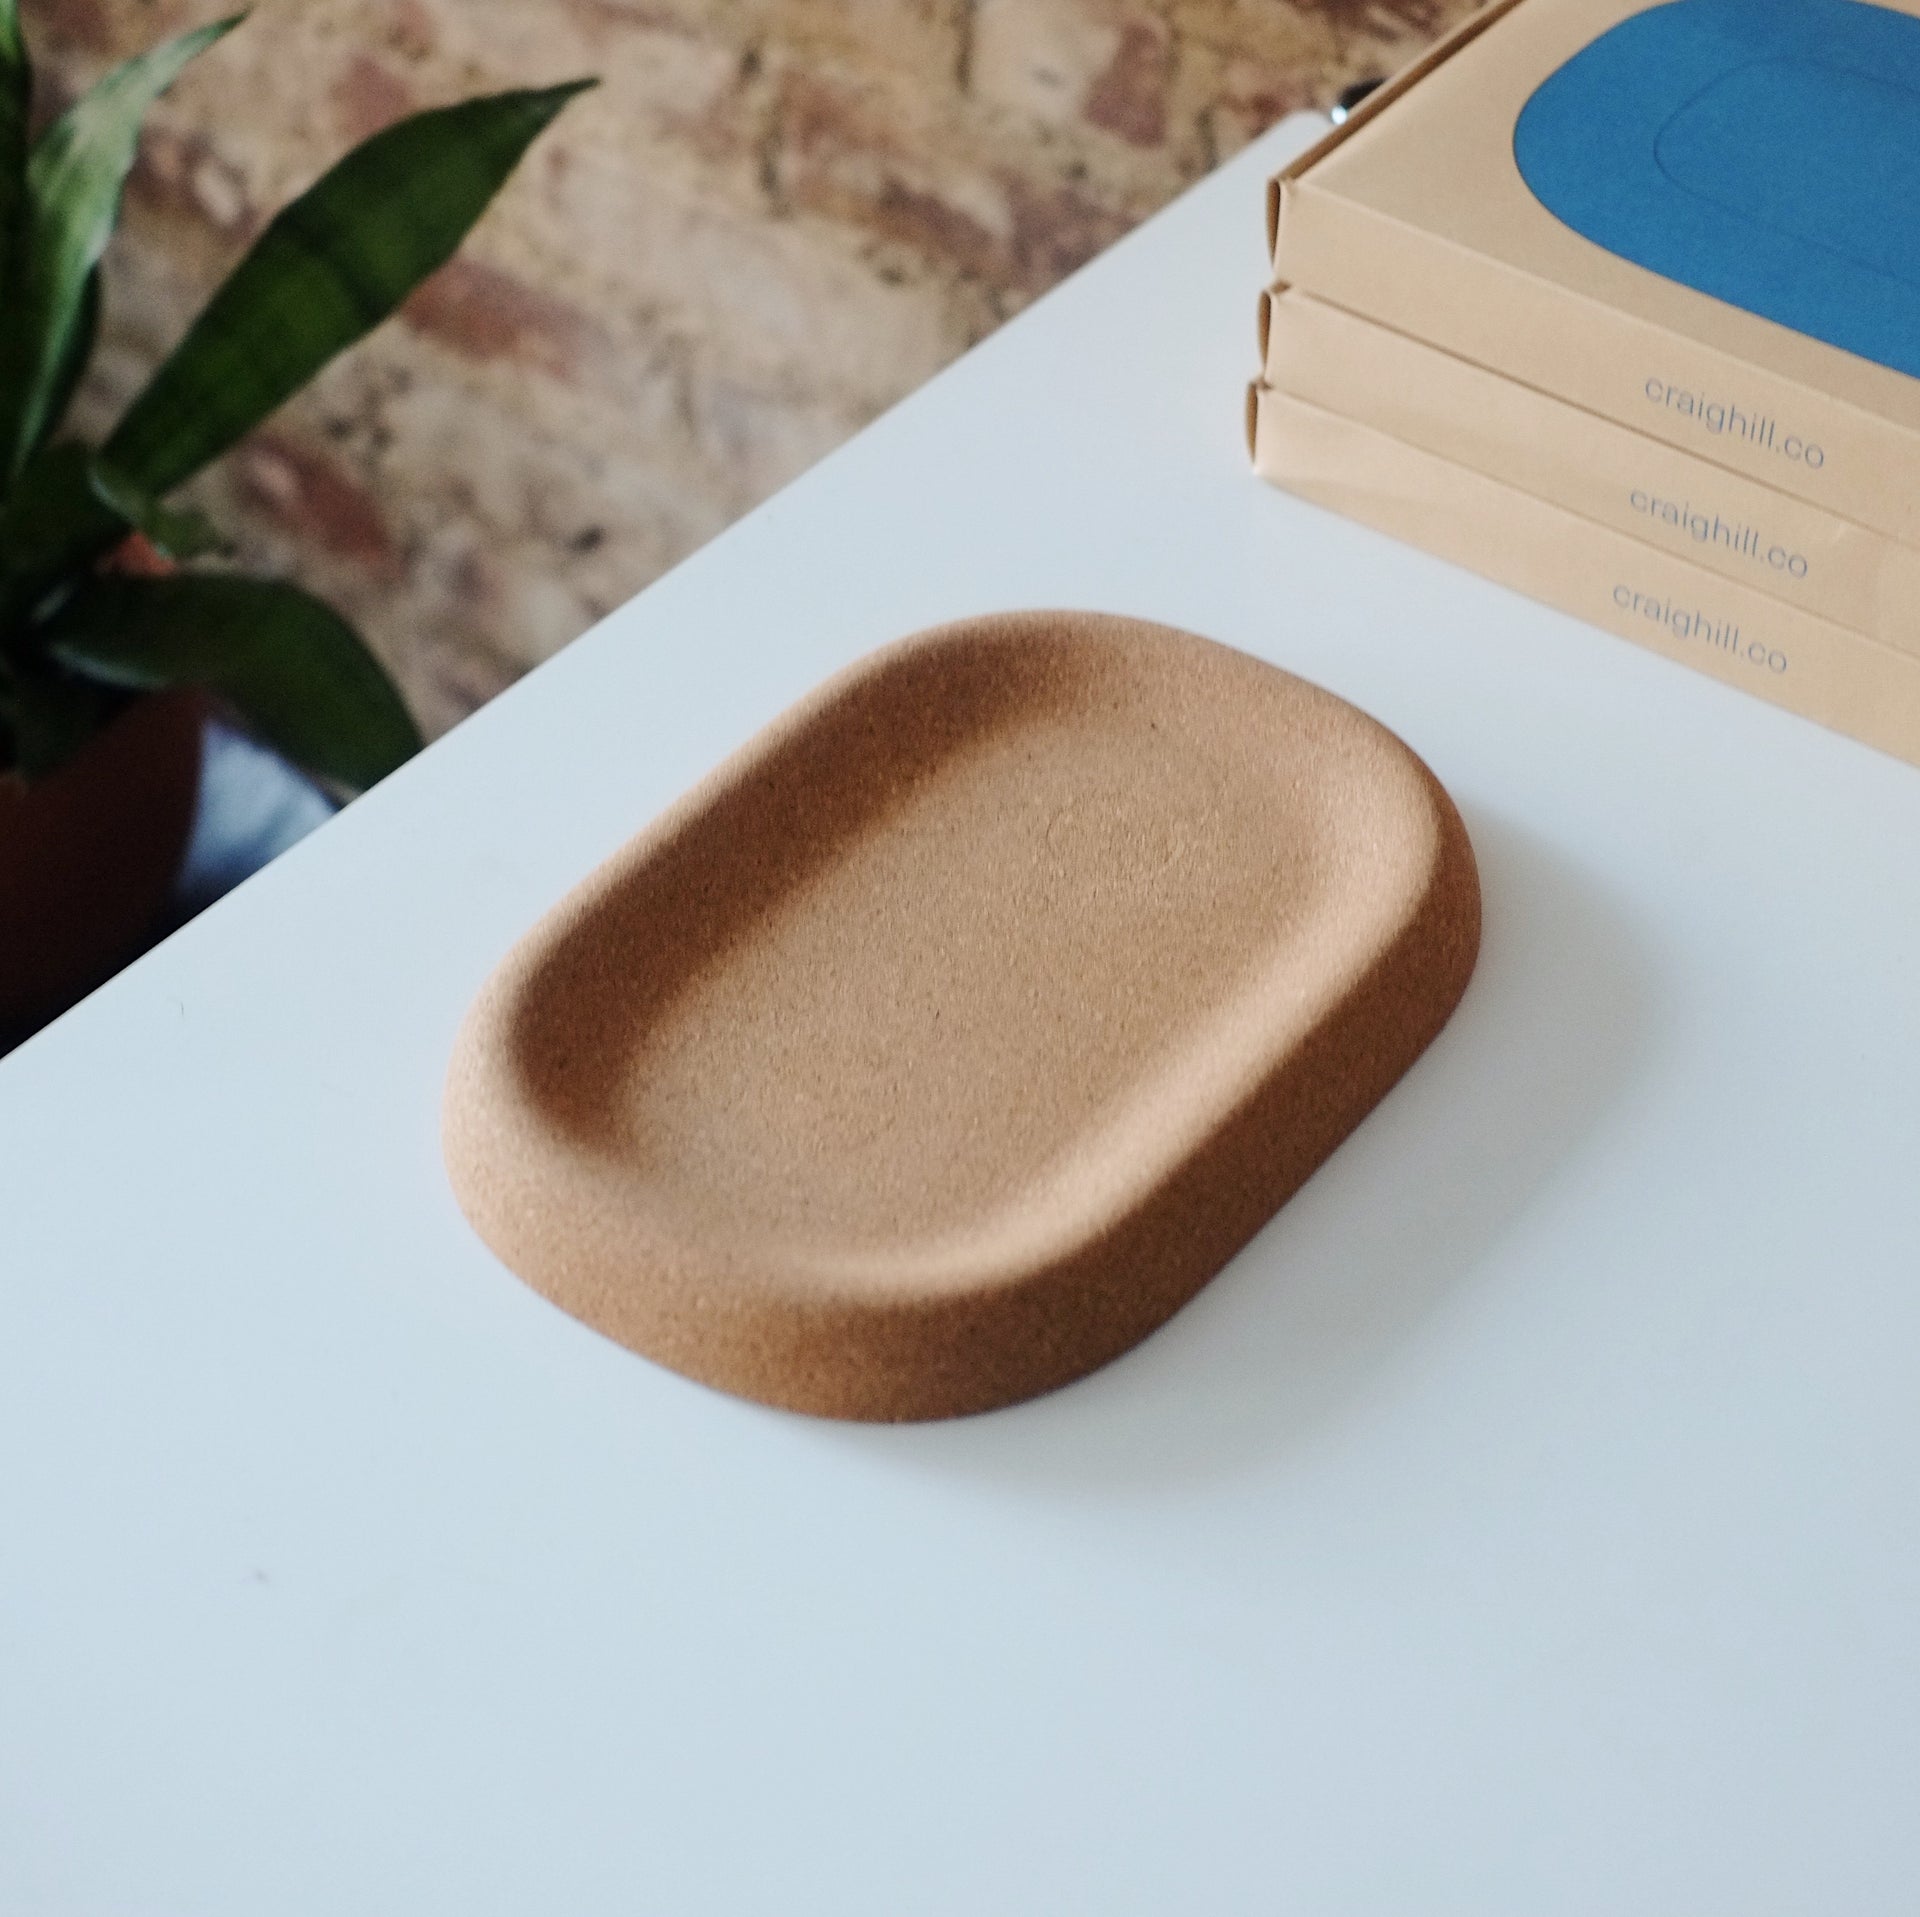 Little Cloud Tray by Craighill